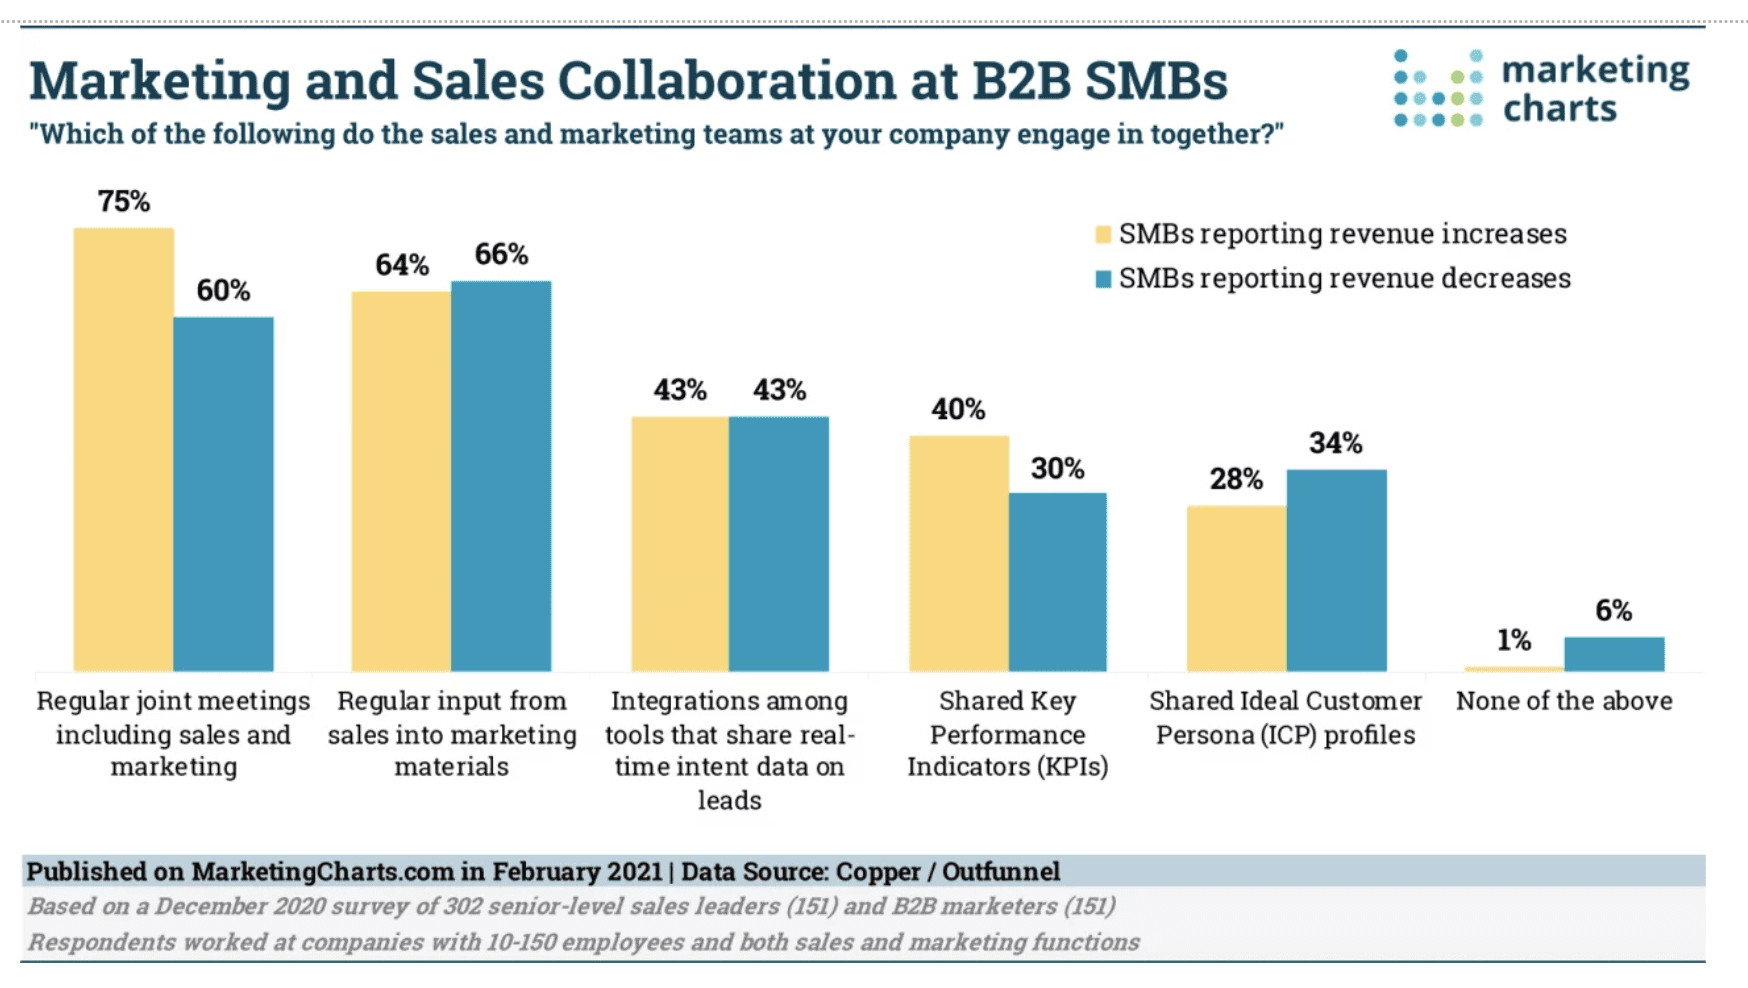 Marketing and Sales collaboration in B2B SMBs